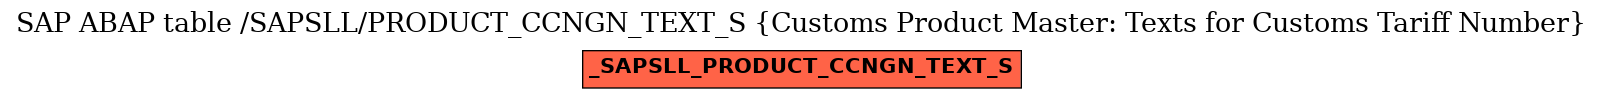 E-R Diagram for table /SAPSLL/PRODUCT_CCNGN_TEXT_S (Customs Product Master: Texts for Customs Tariff Number)